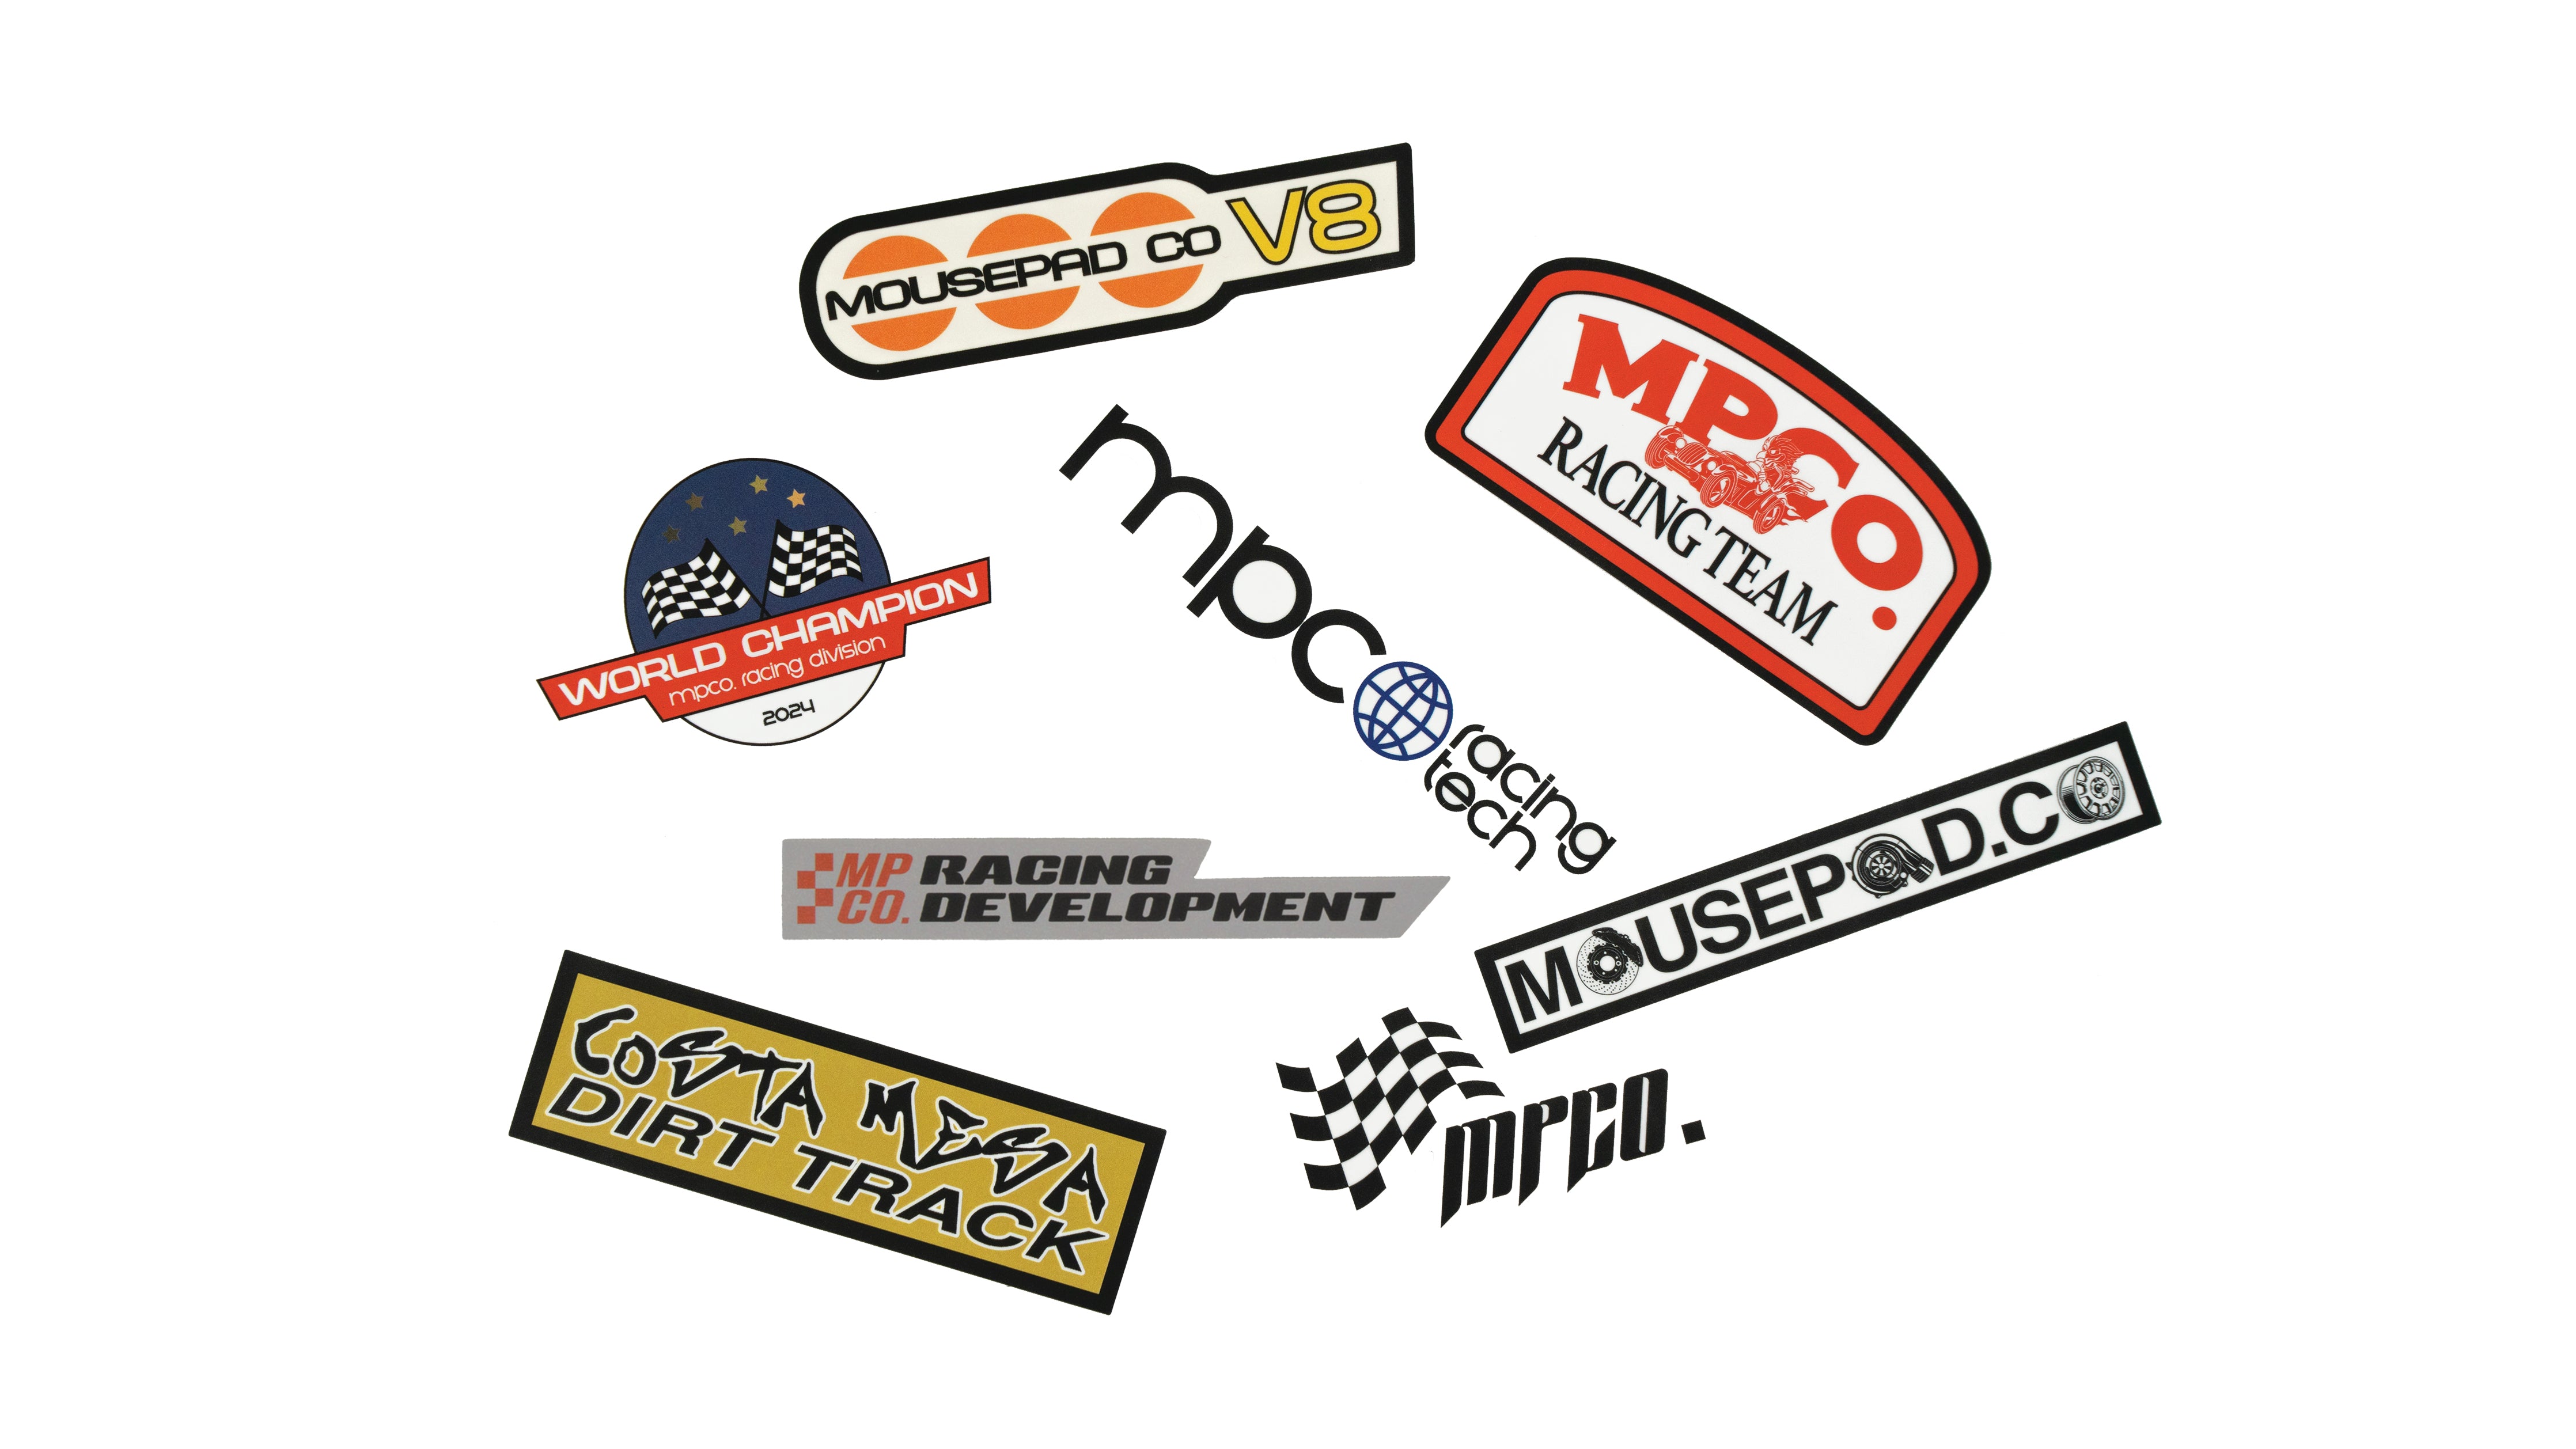 "The Racing Sticker Pack" - The Mousepad Company